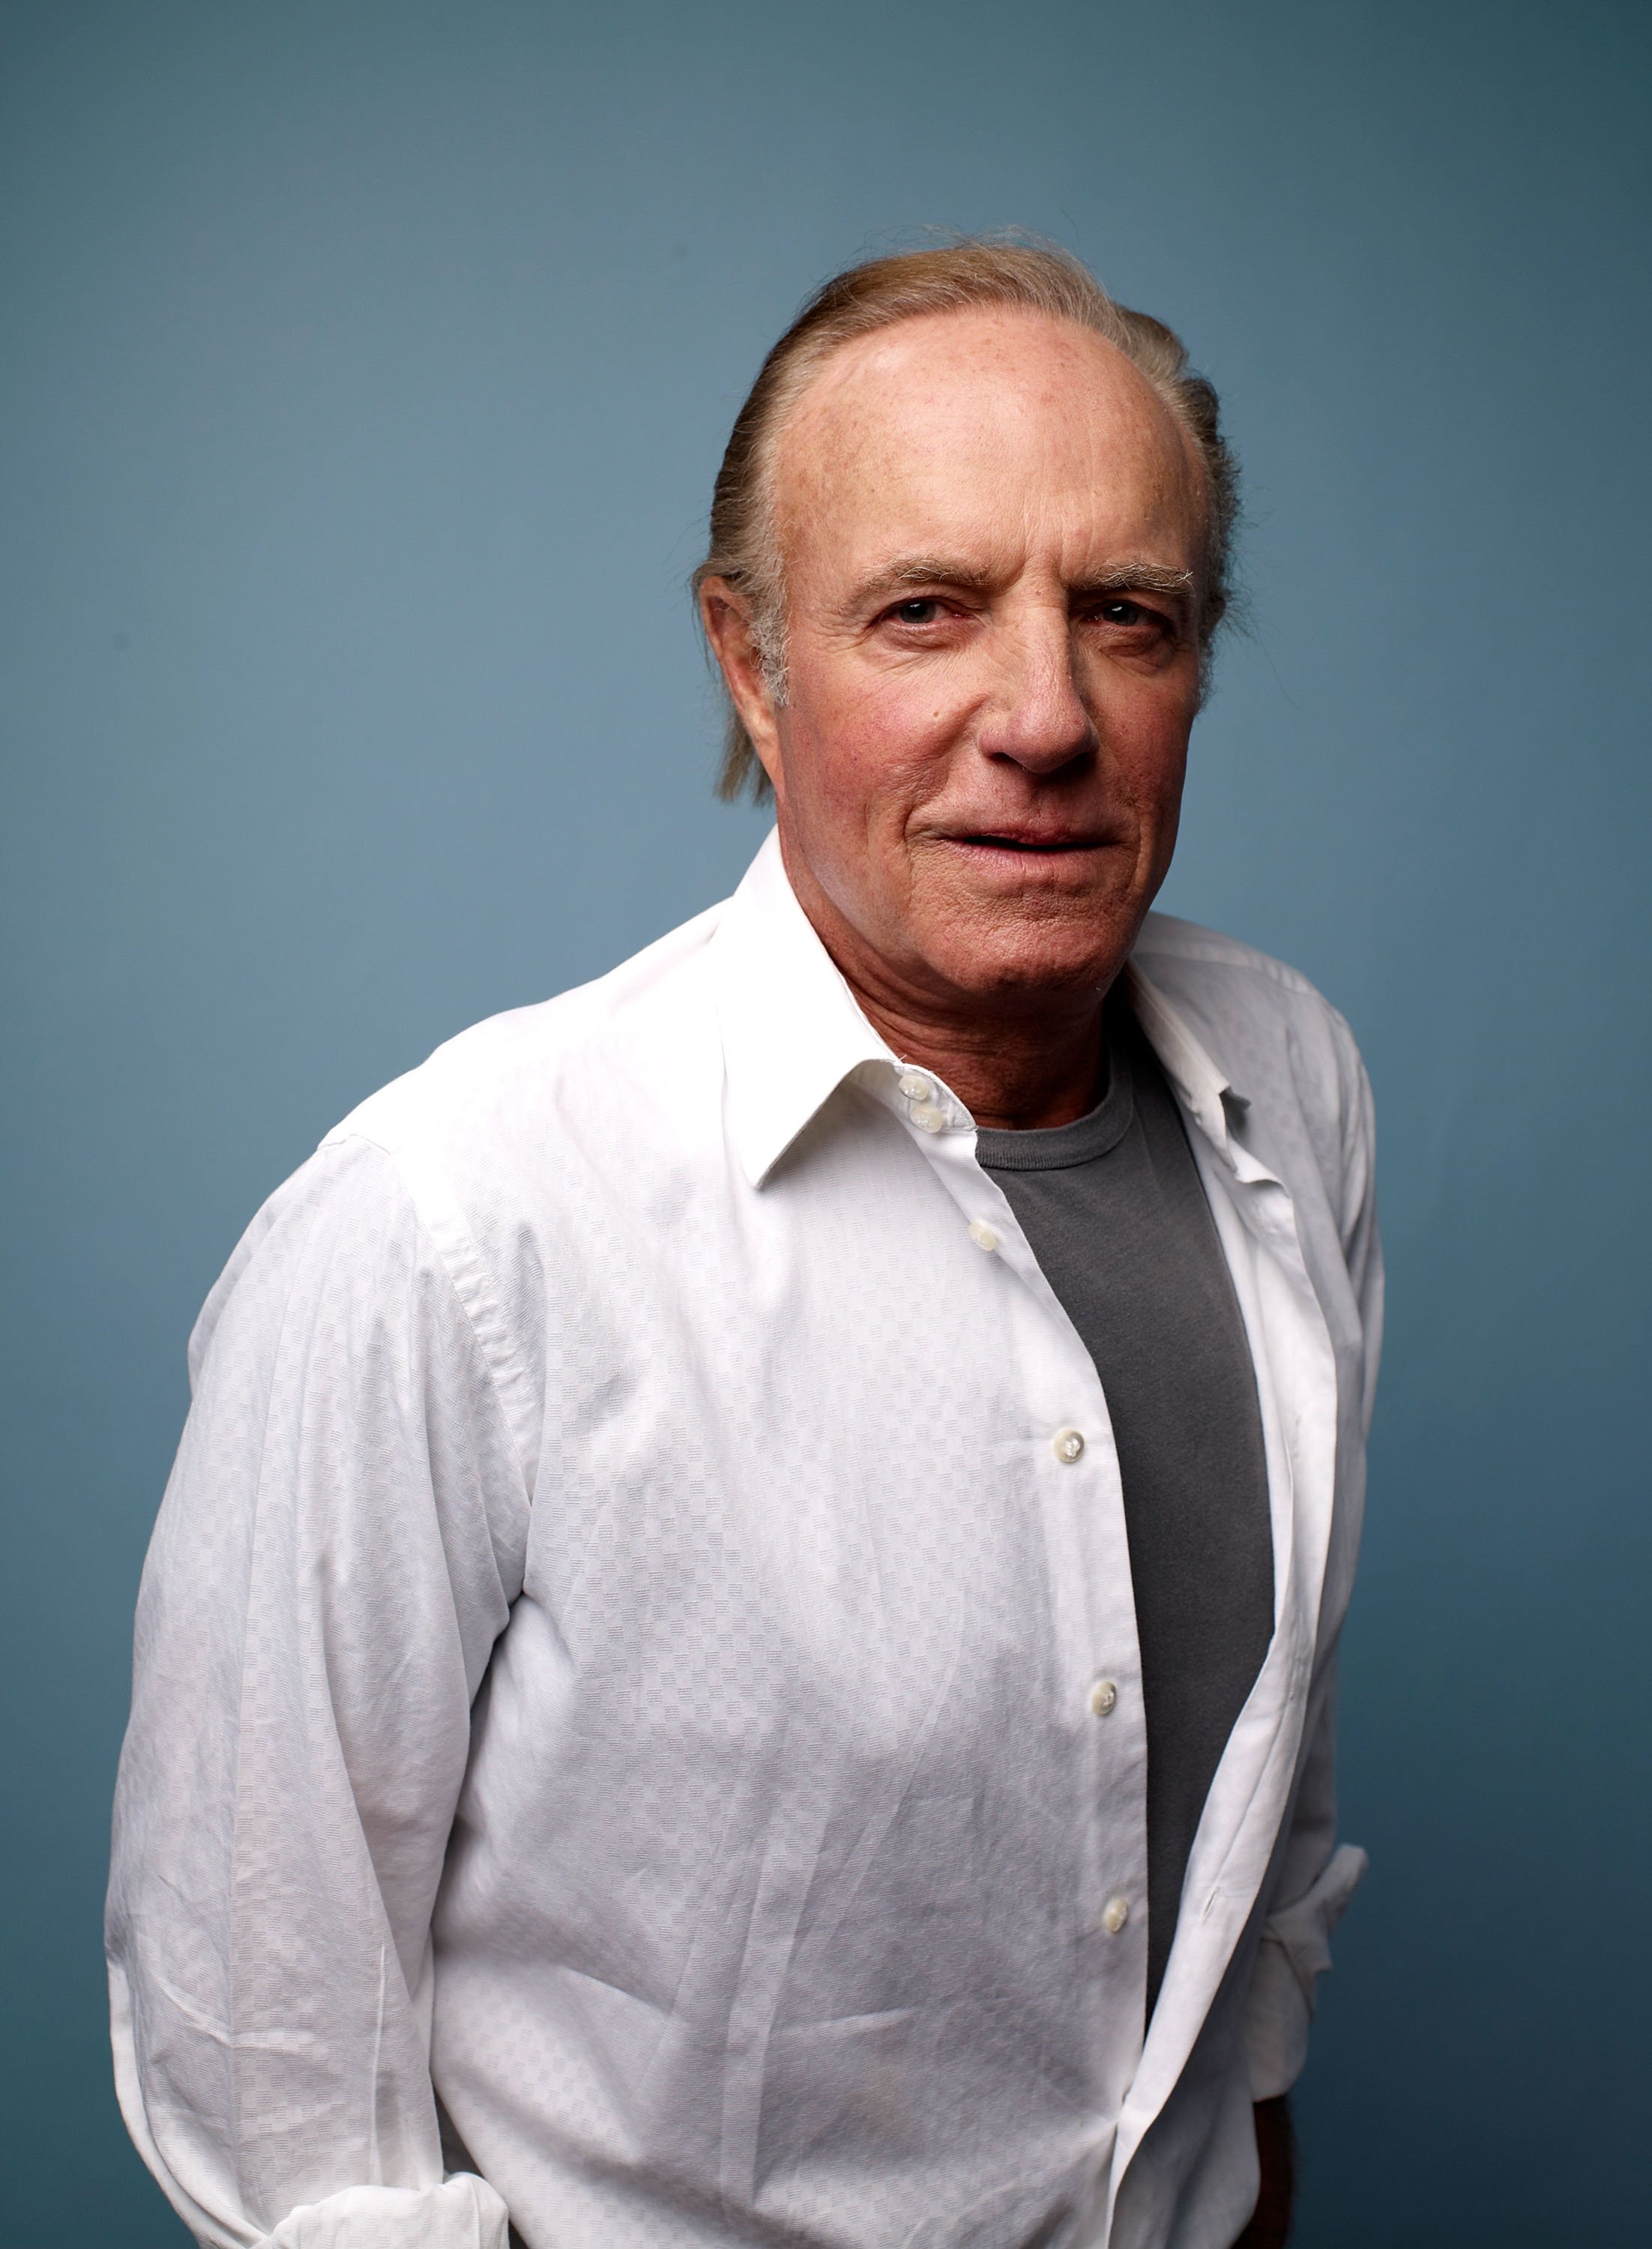 James Caan posing for a portrait for the movie "Henry's Crime" during the 2010 Toronto International Film Festival in Guess Portrait Studio at Hyatt Regency Hotel on September 14, 2010 in Toronto, Canada. / Source: Getty Images